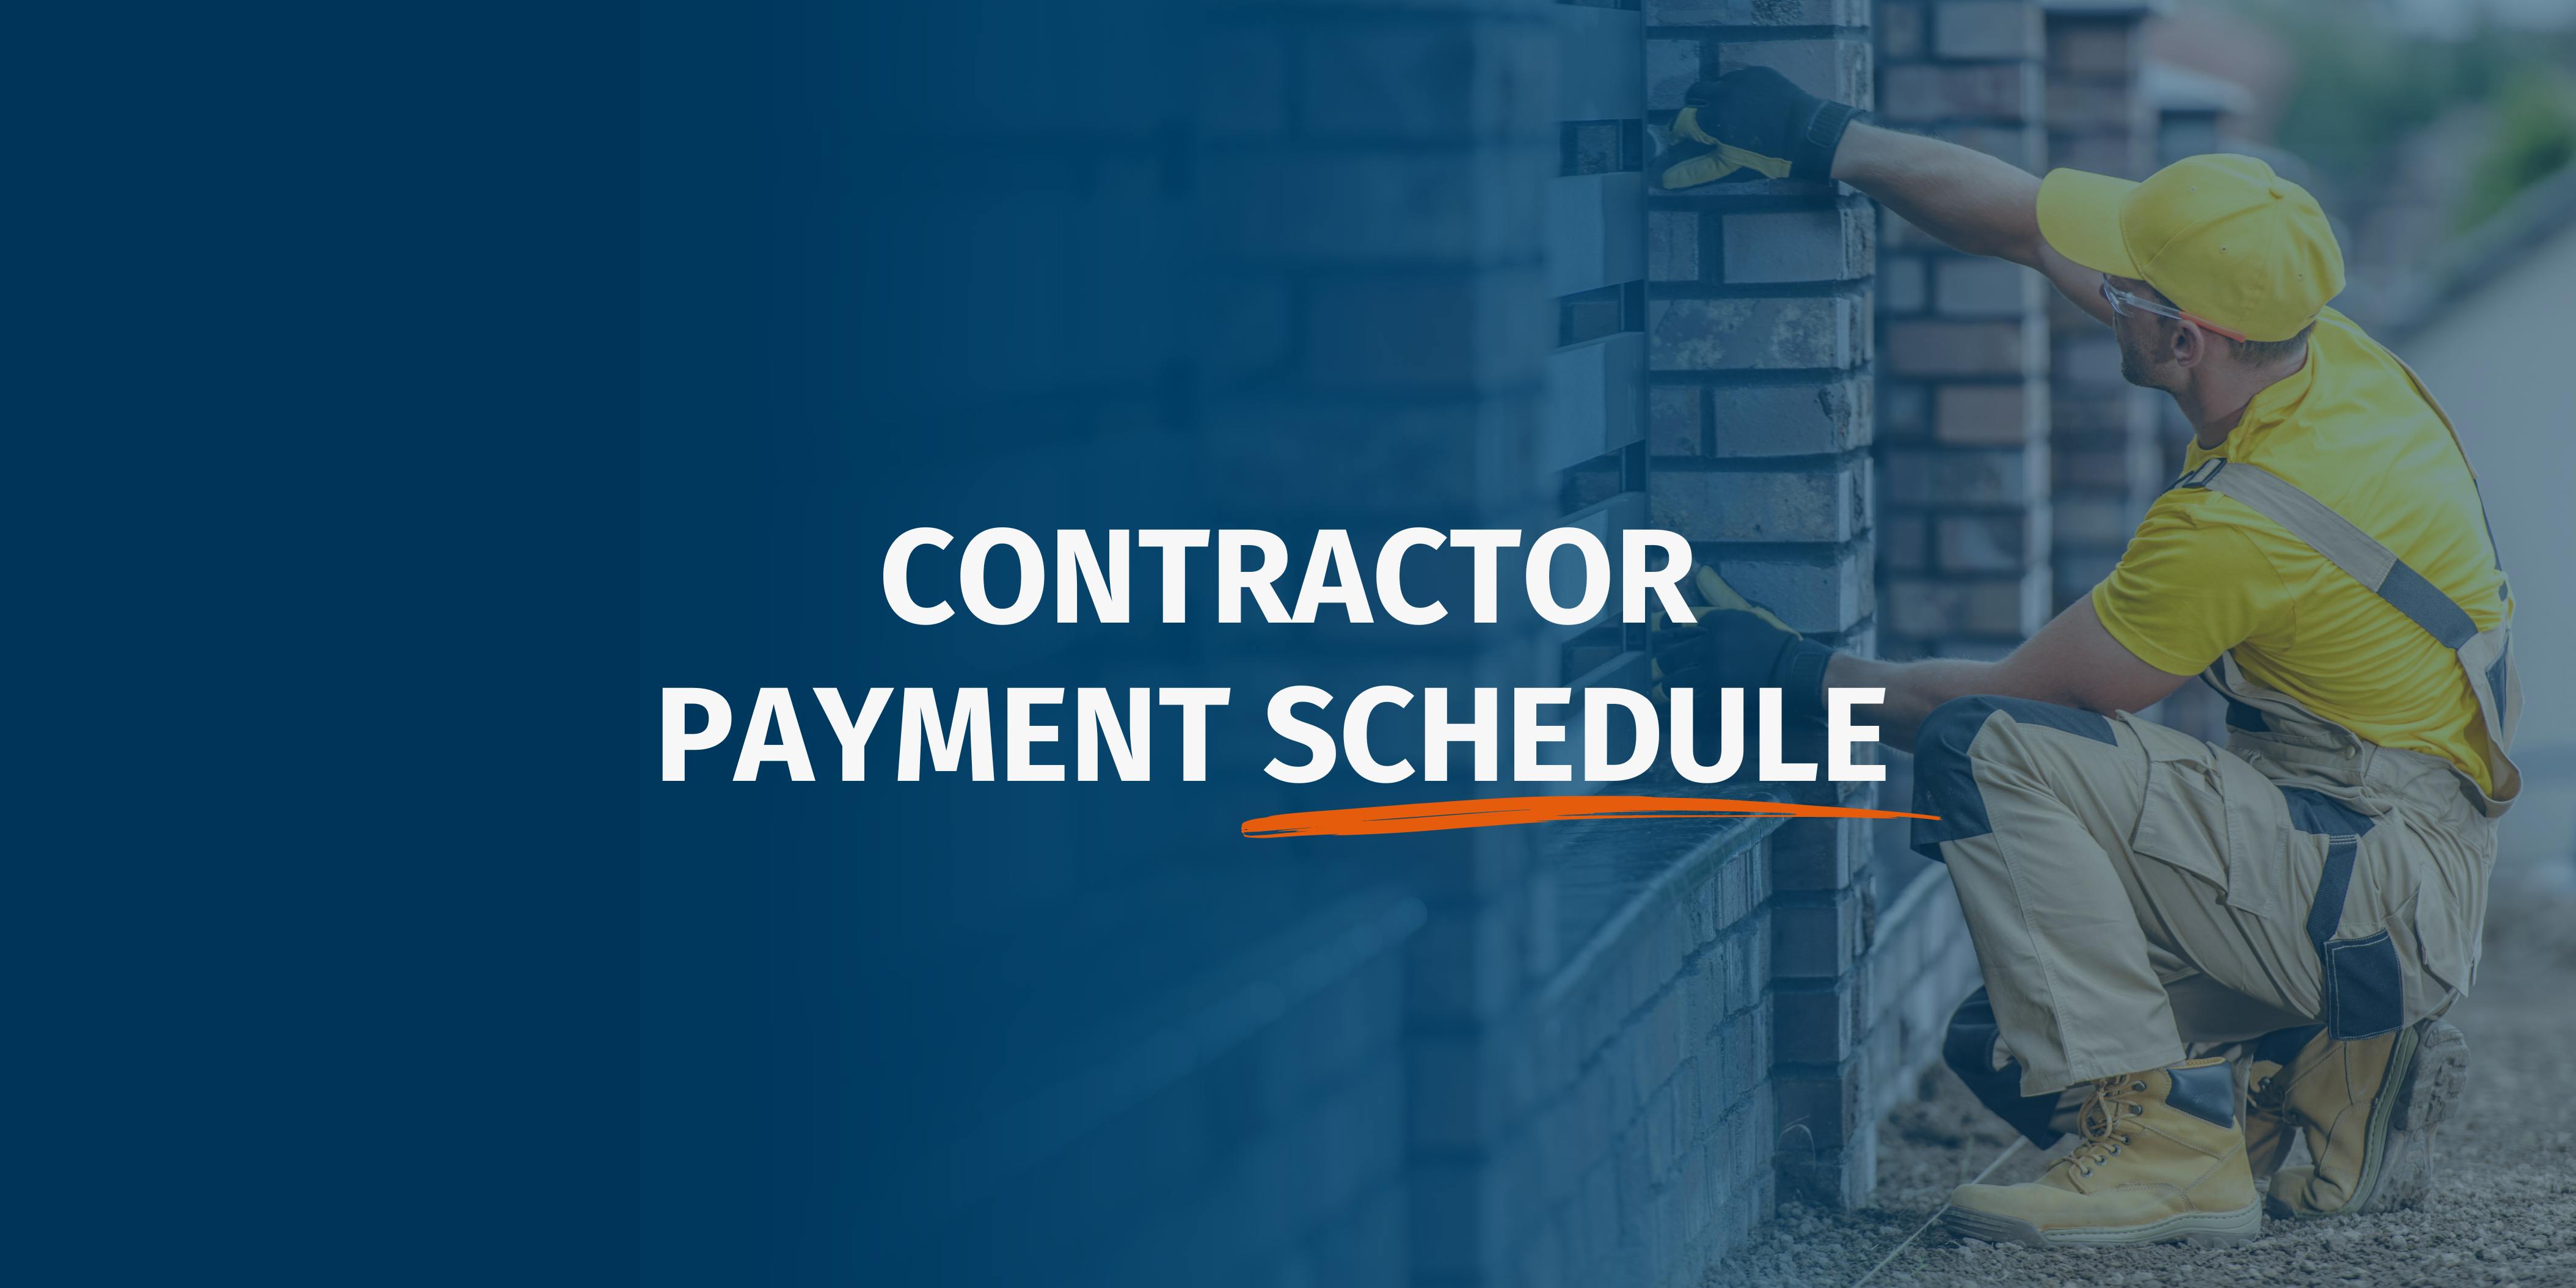 Contractor Payment Schedules